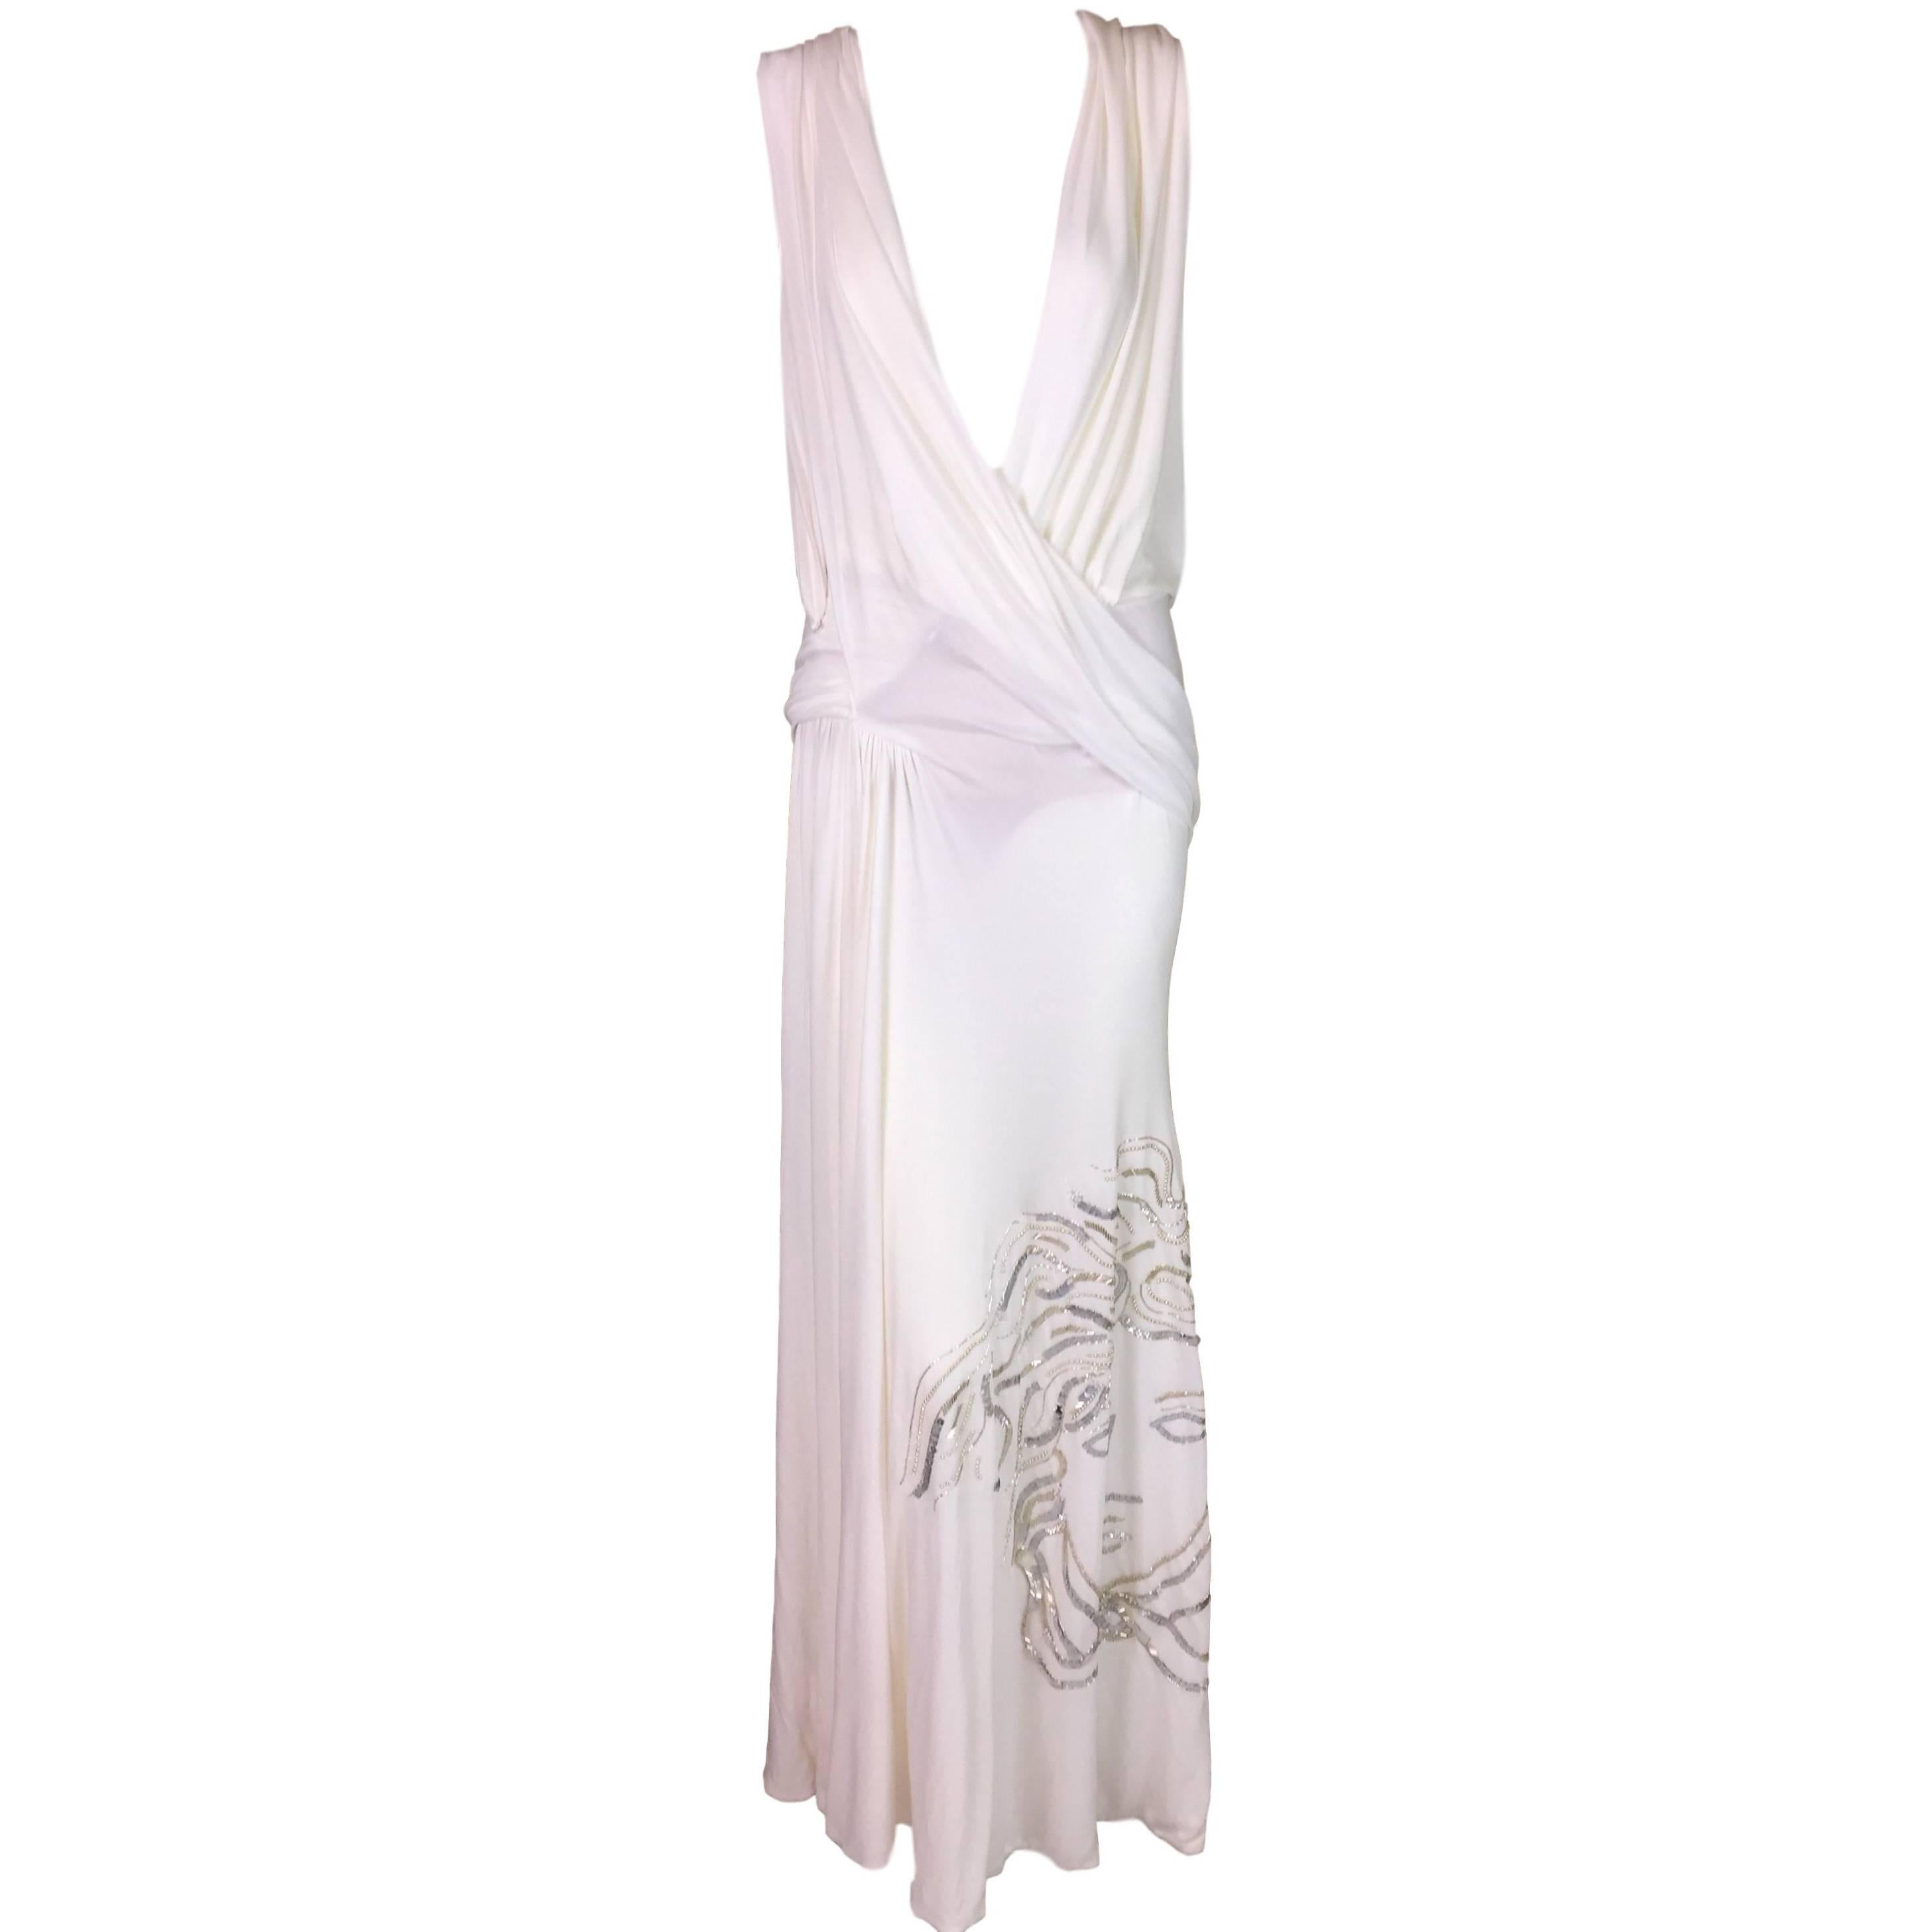 F/W 1999 Atelier Versace Sheer White Plunging Beaded Medusa Gown Dress